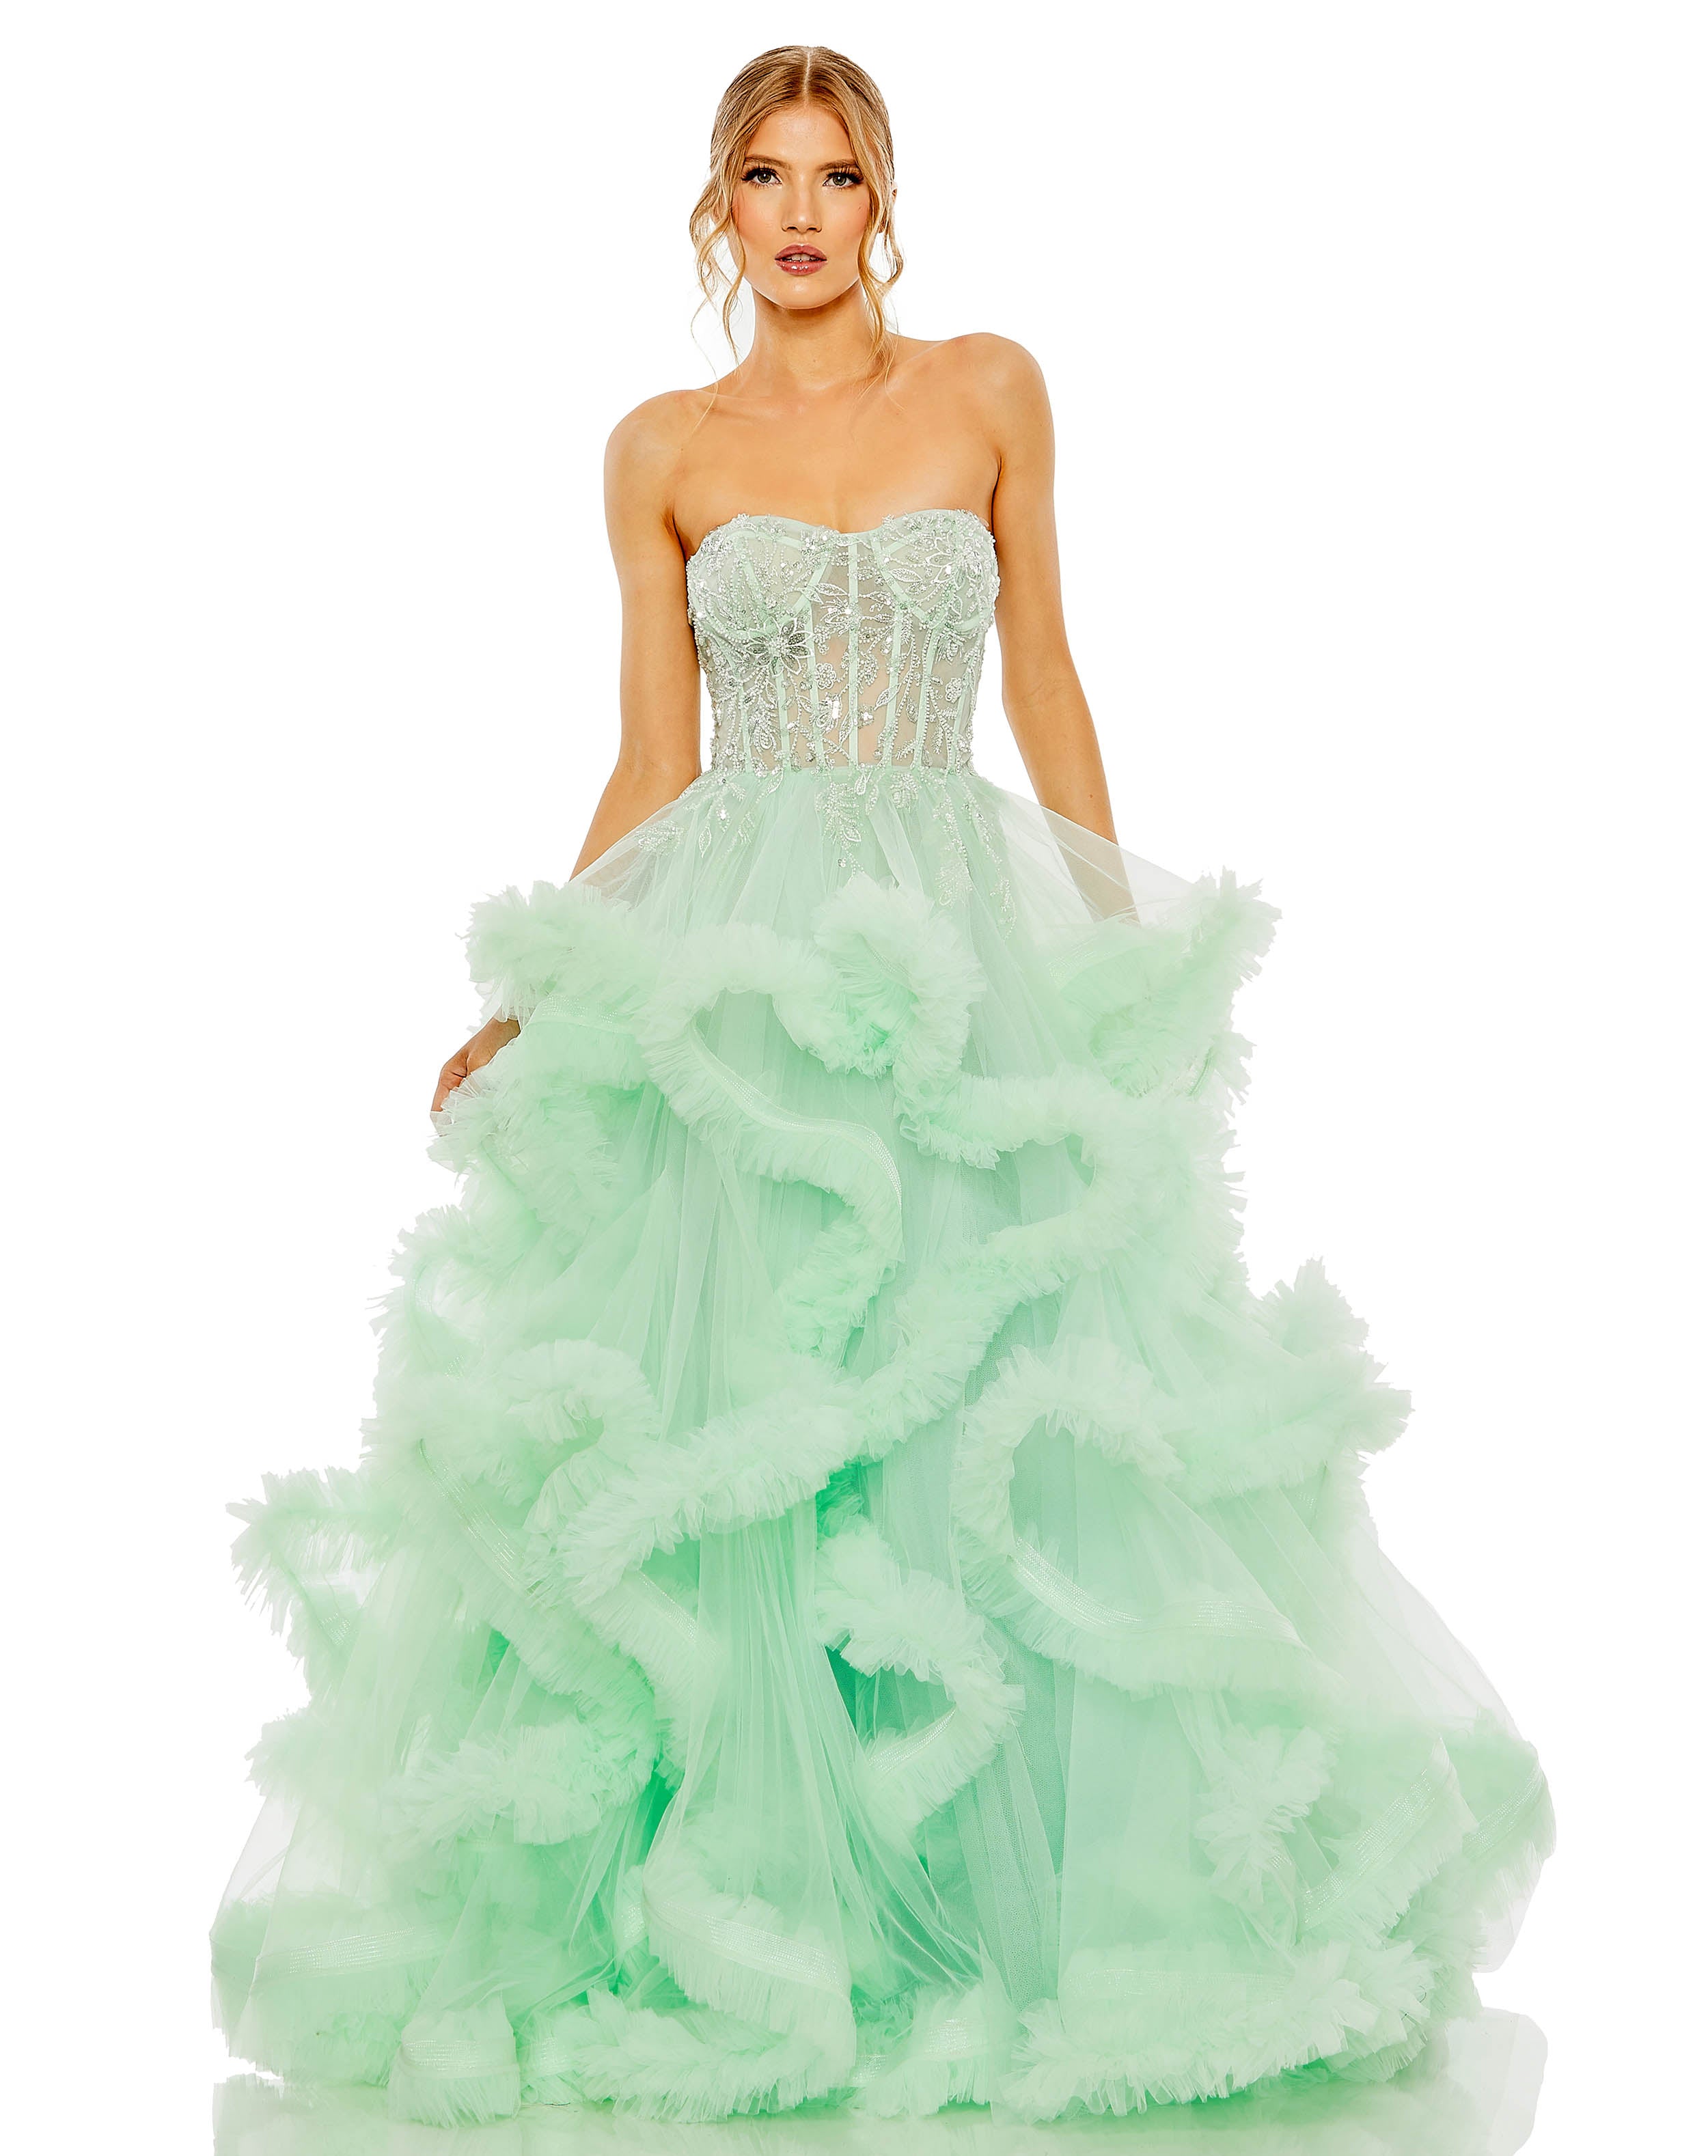 Strapless Corset Detail Tulle Layered Gown - FINAL SALE